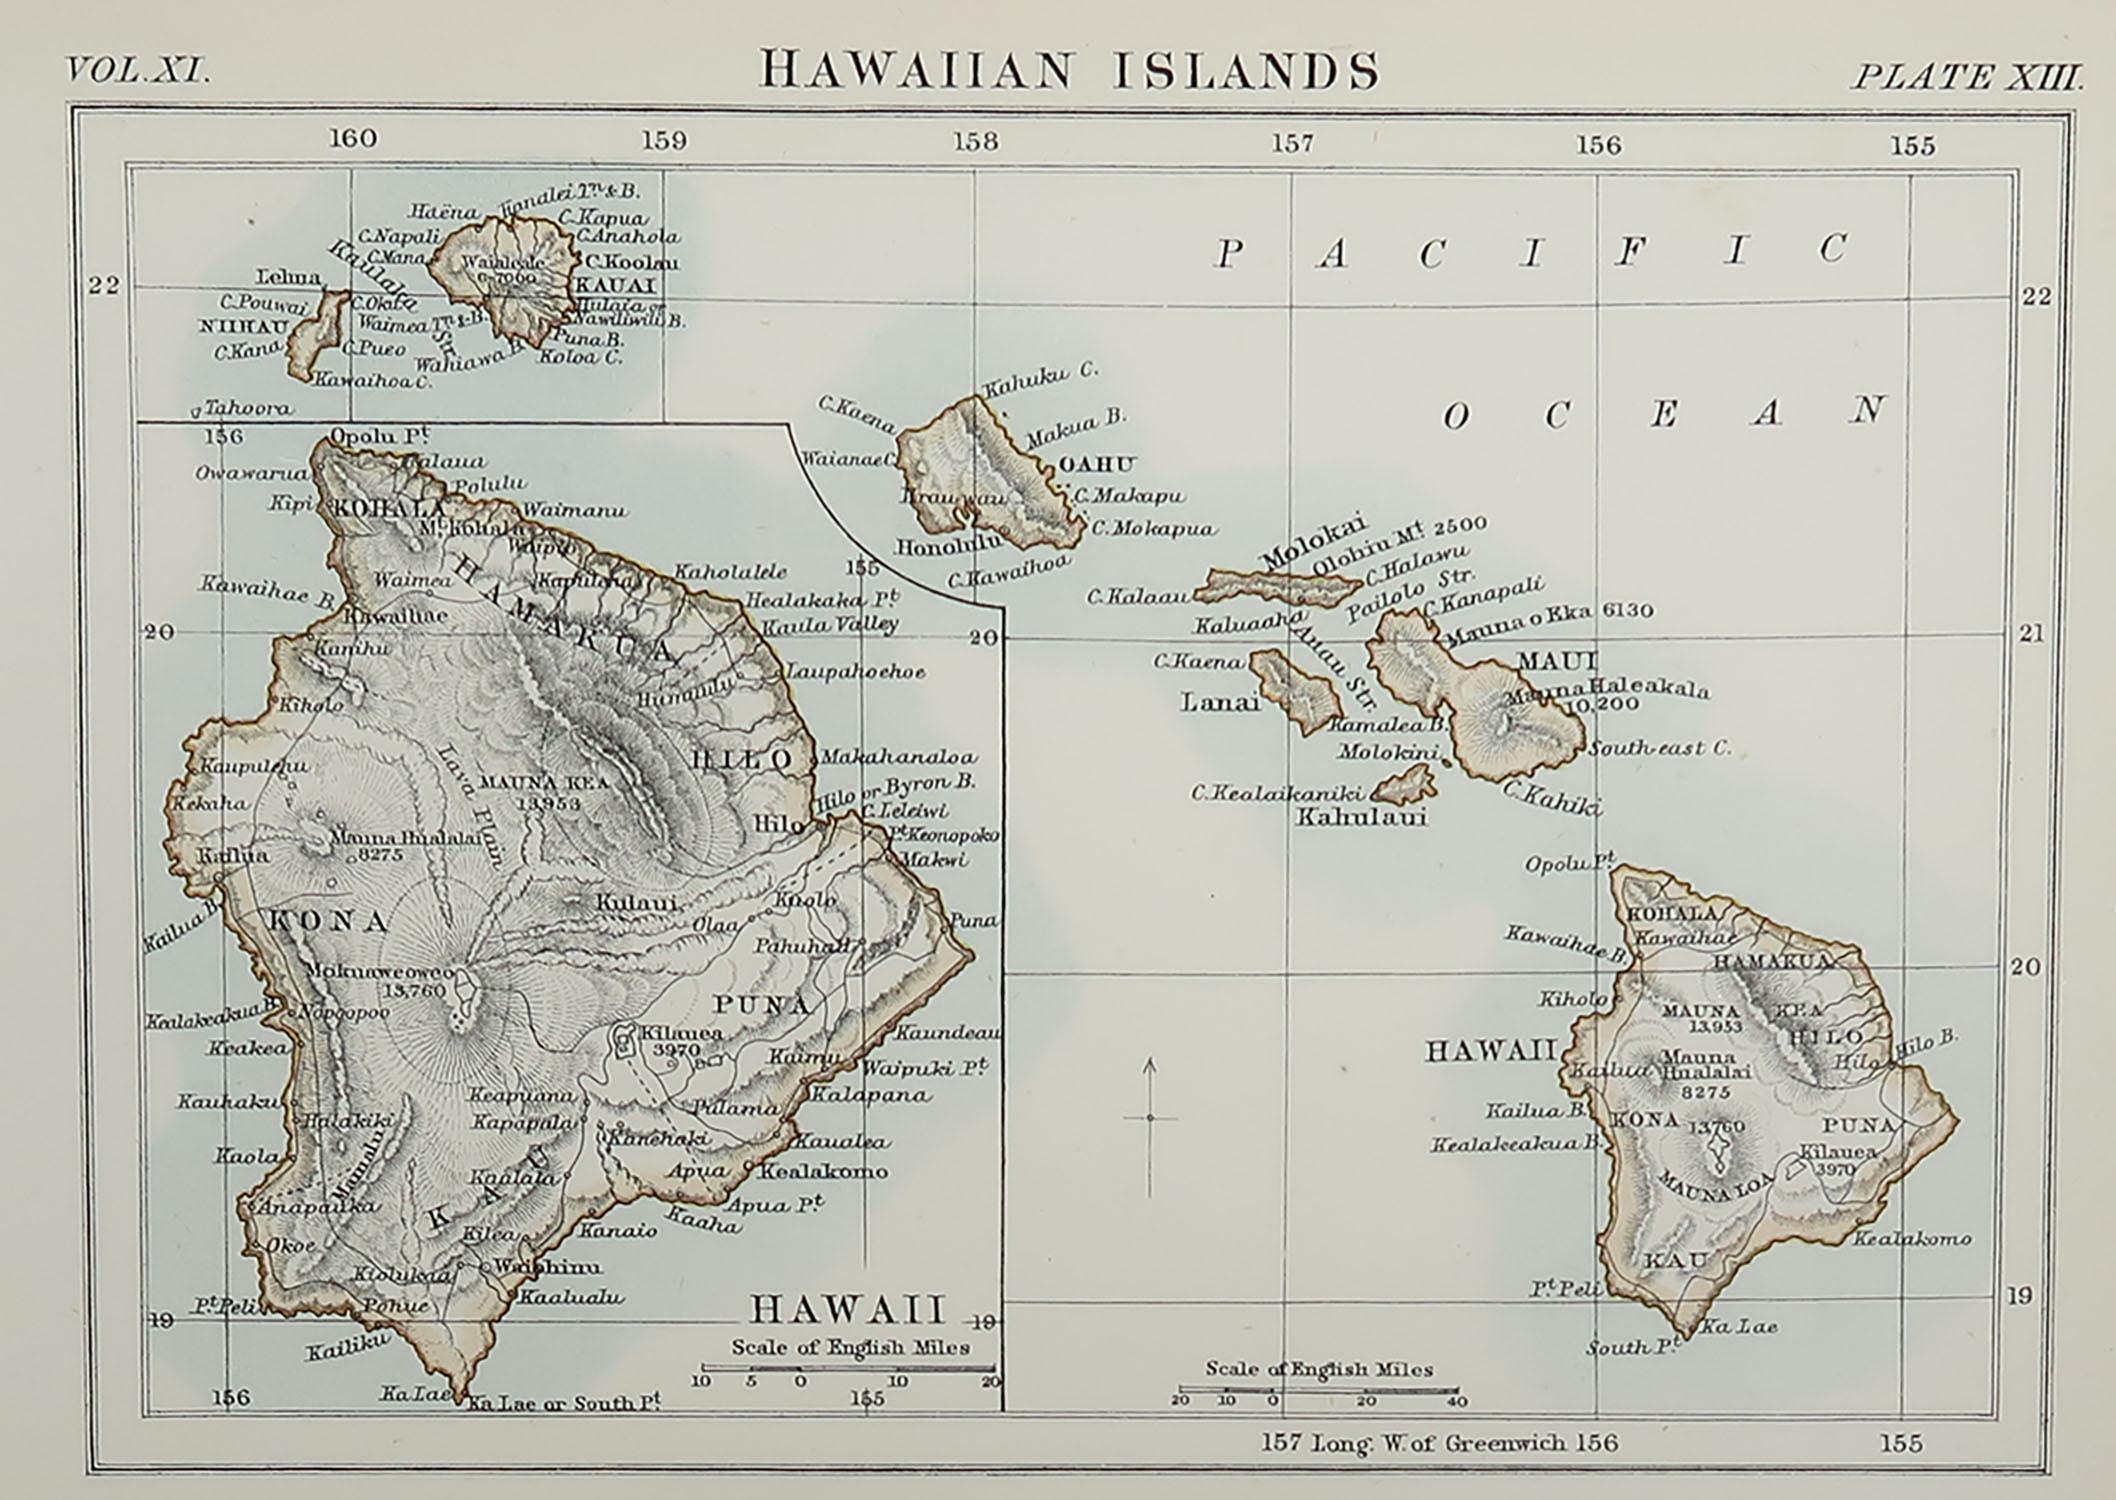 Great map of Hawaii and Hispaniola

Drawn and Engraved by W. & A.K. Johnston

Published By A & C Black, Edinburgh.

Original colour

Unframed.








 